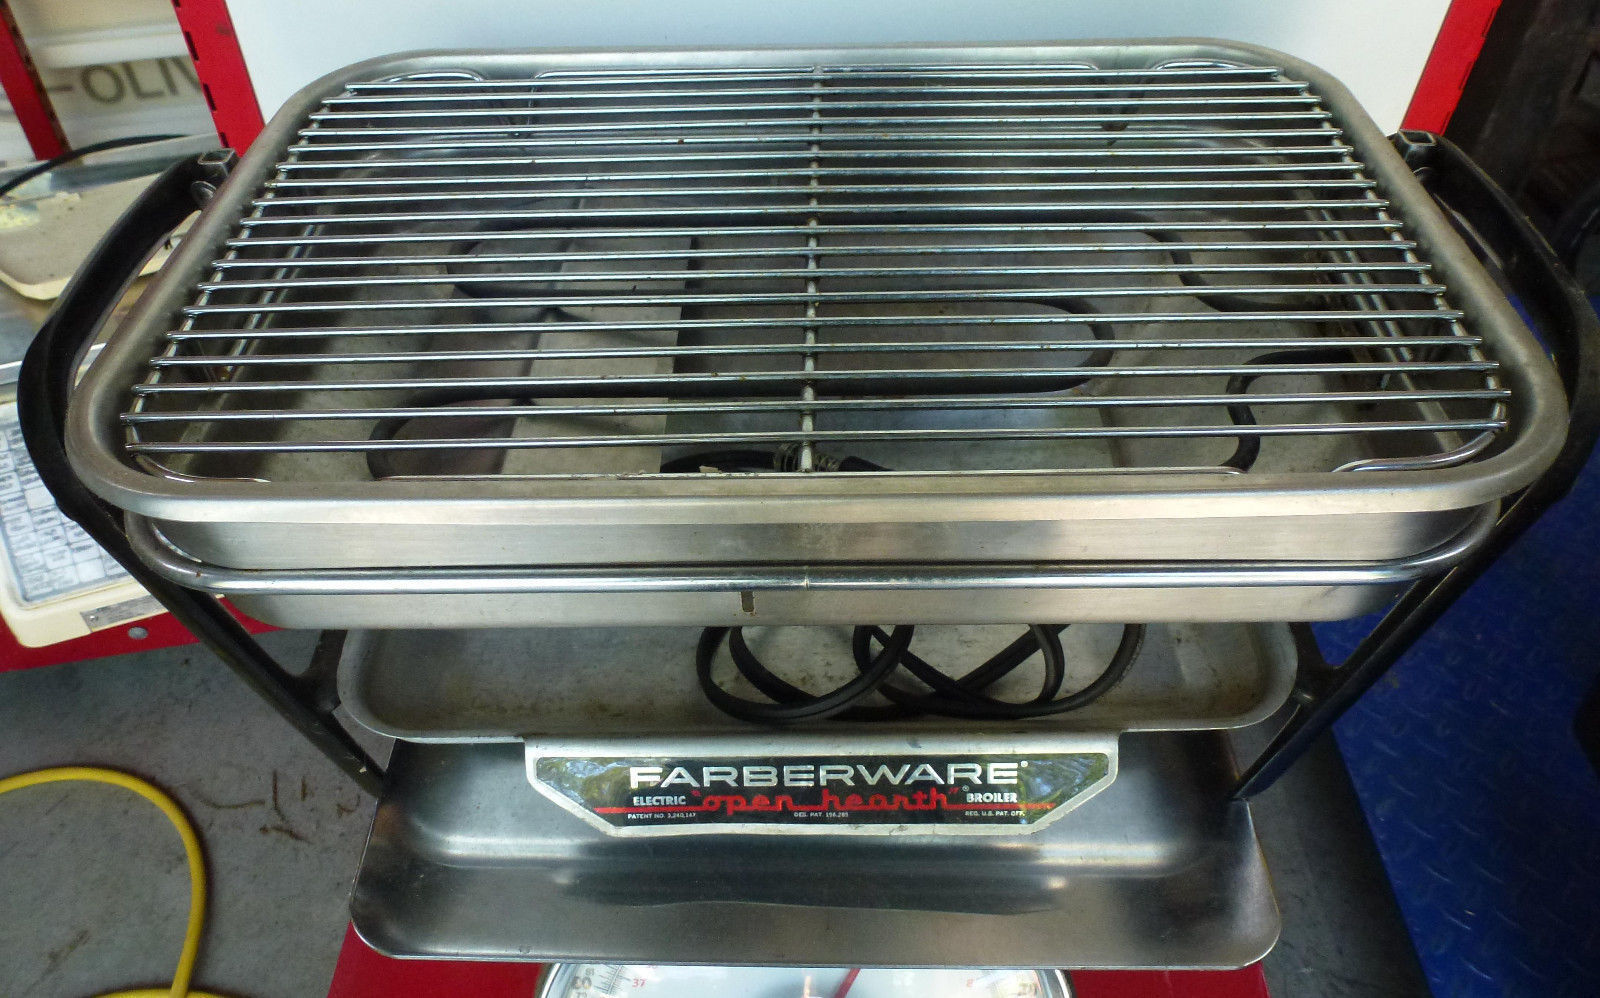 Vintage 450-A Farberware Open Hearth Broiler grill bbq indoor electric - $18.00